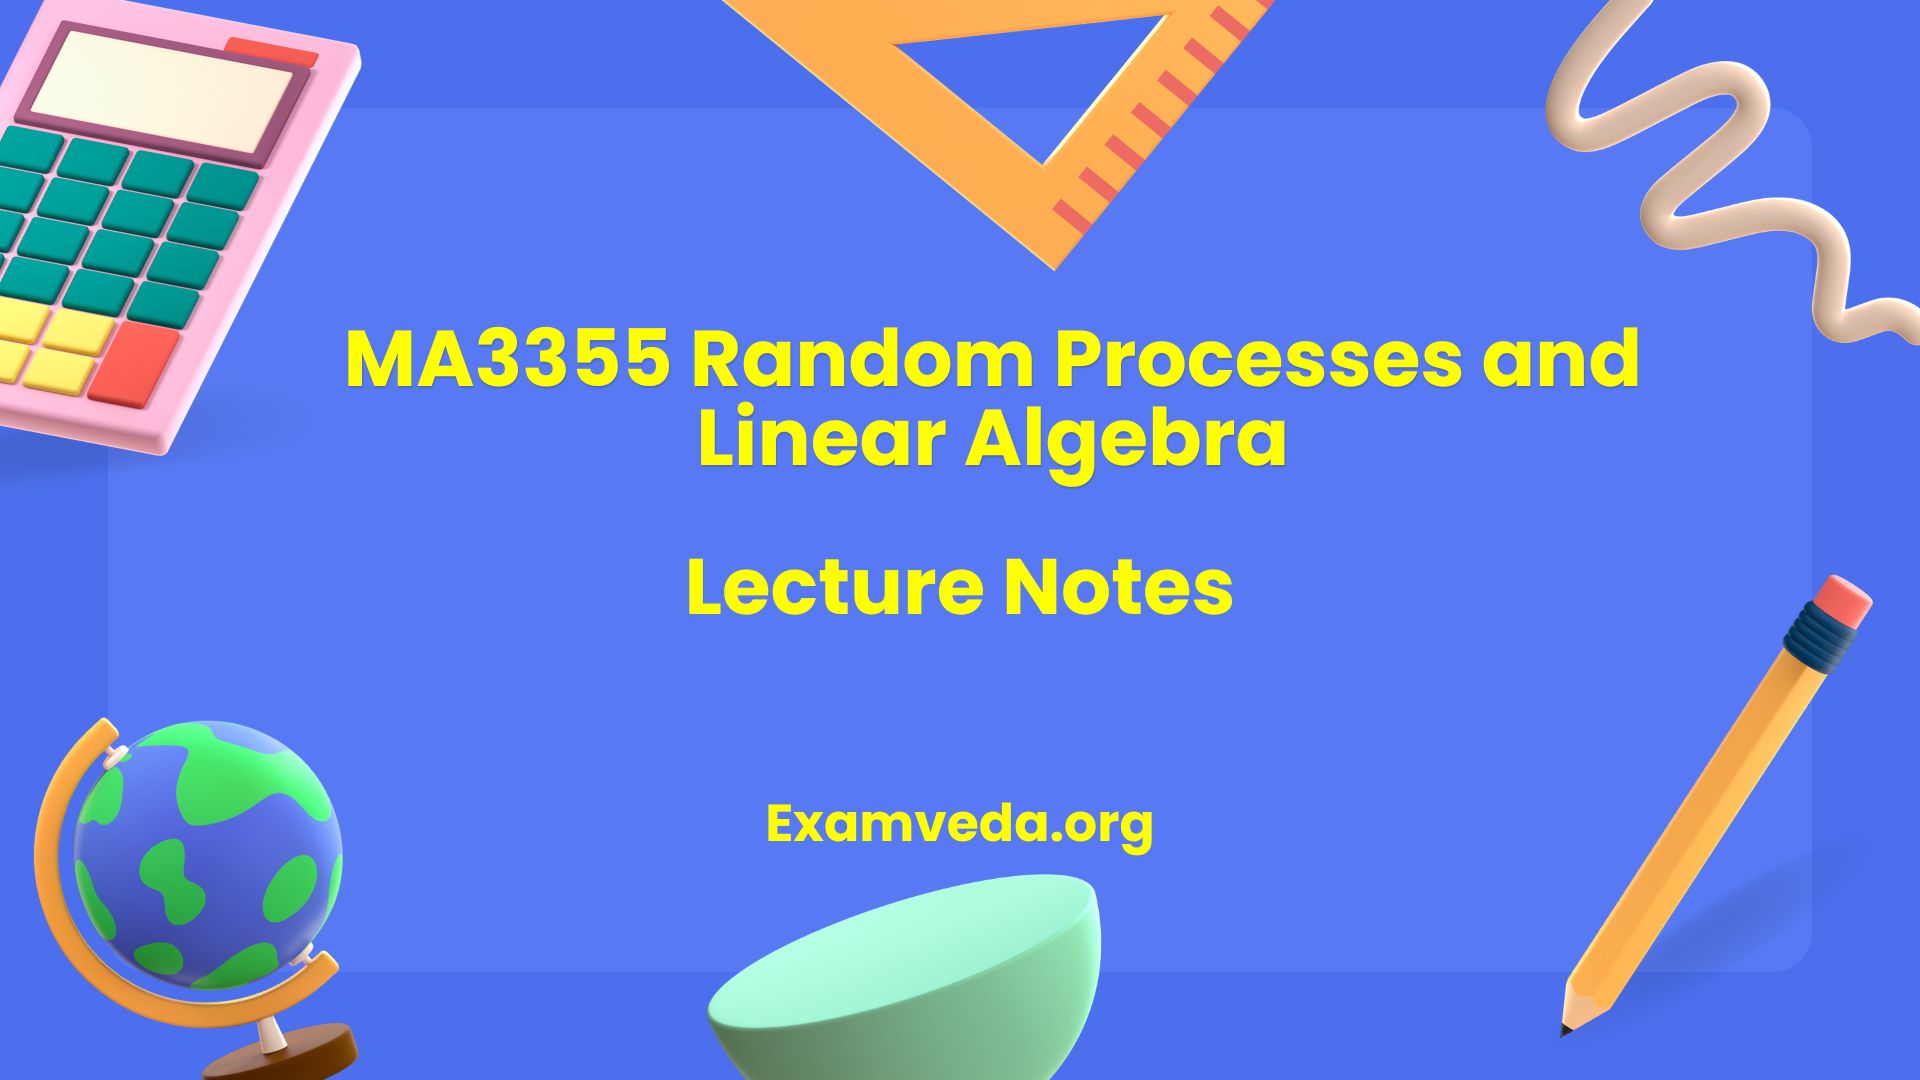 MA3355 Random Processes and Linear Algebra Lecture Notes